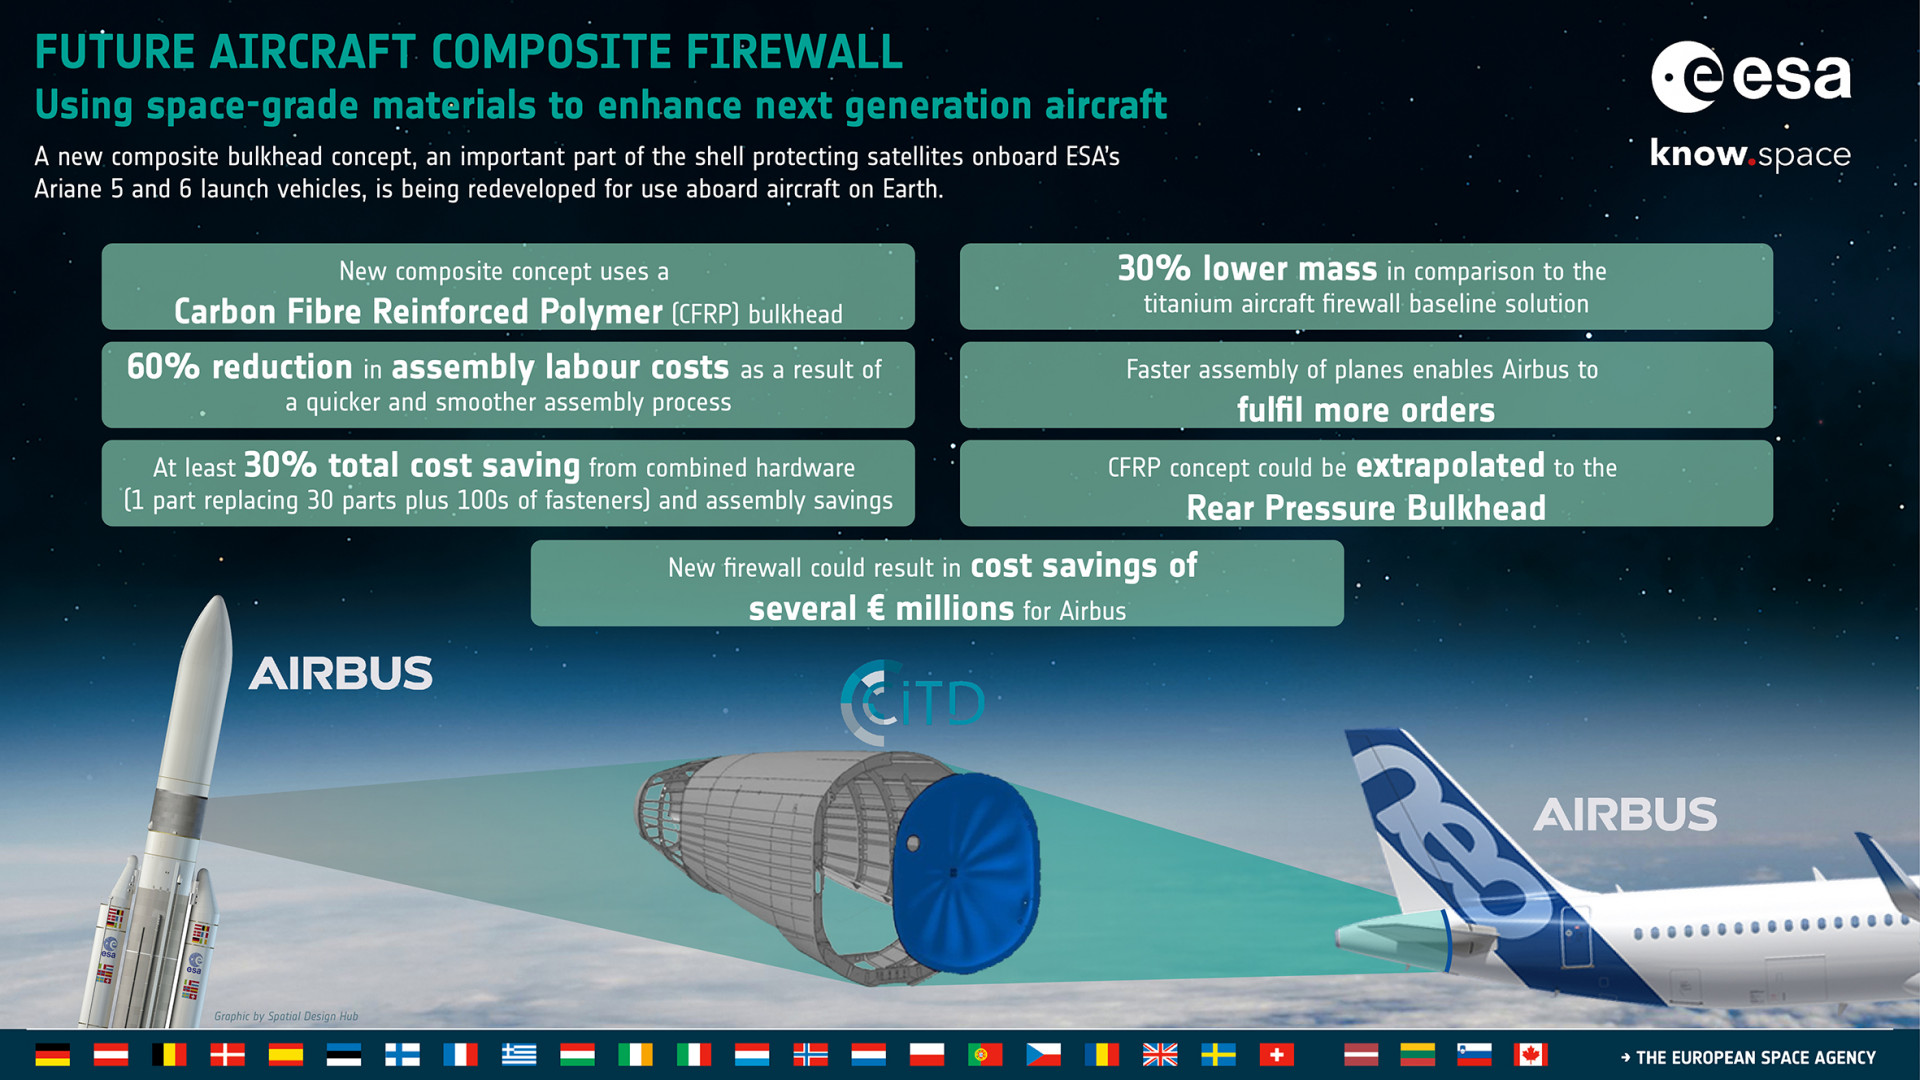 Socio economic benefits from Future Aircraft Composite Firewall - Using space-grade materials to enhance next generation aircraft